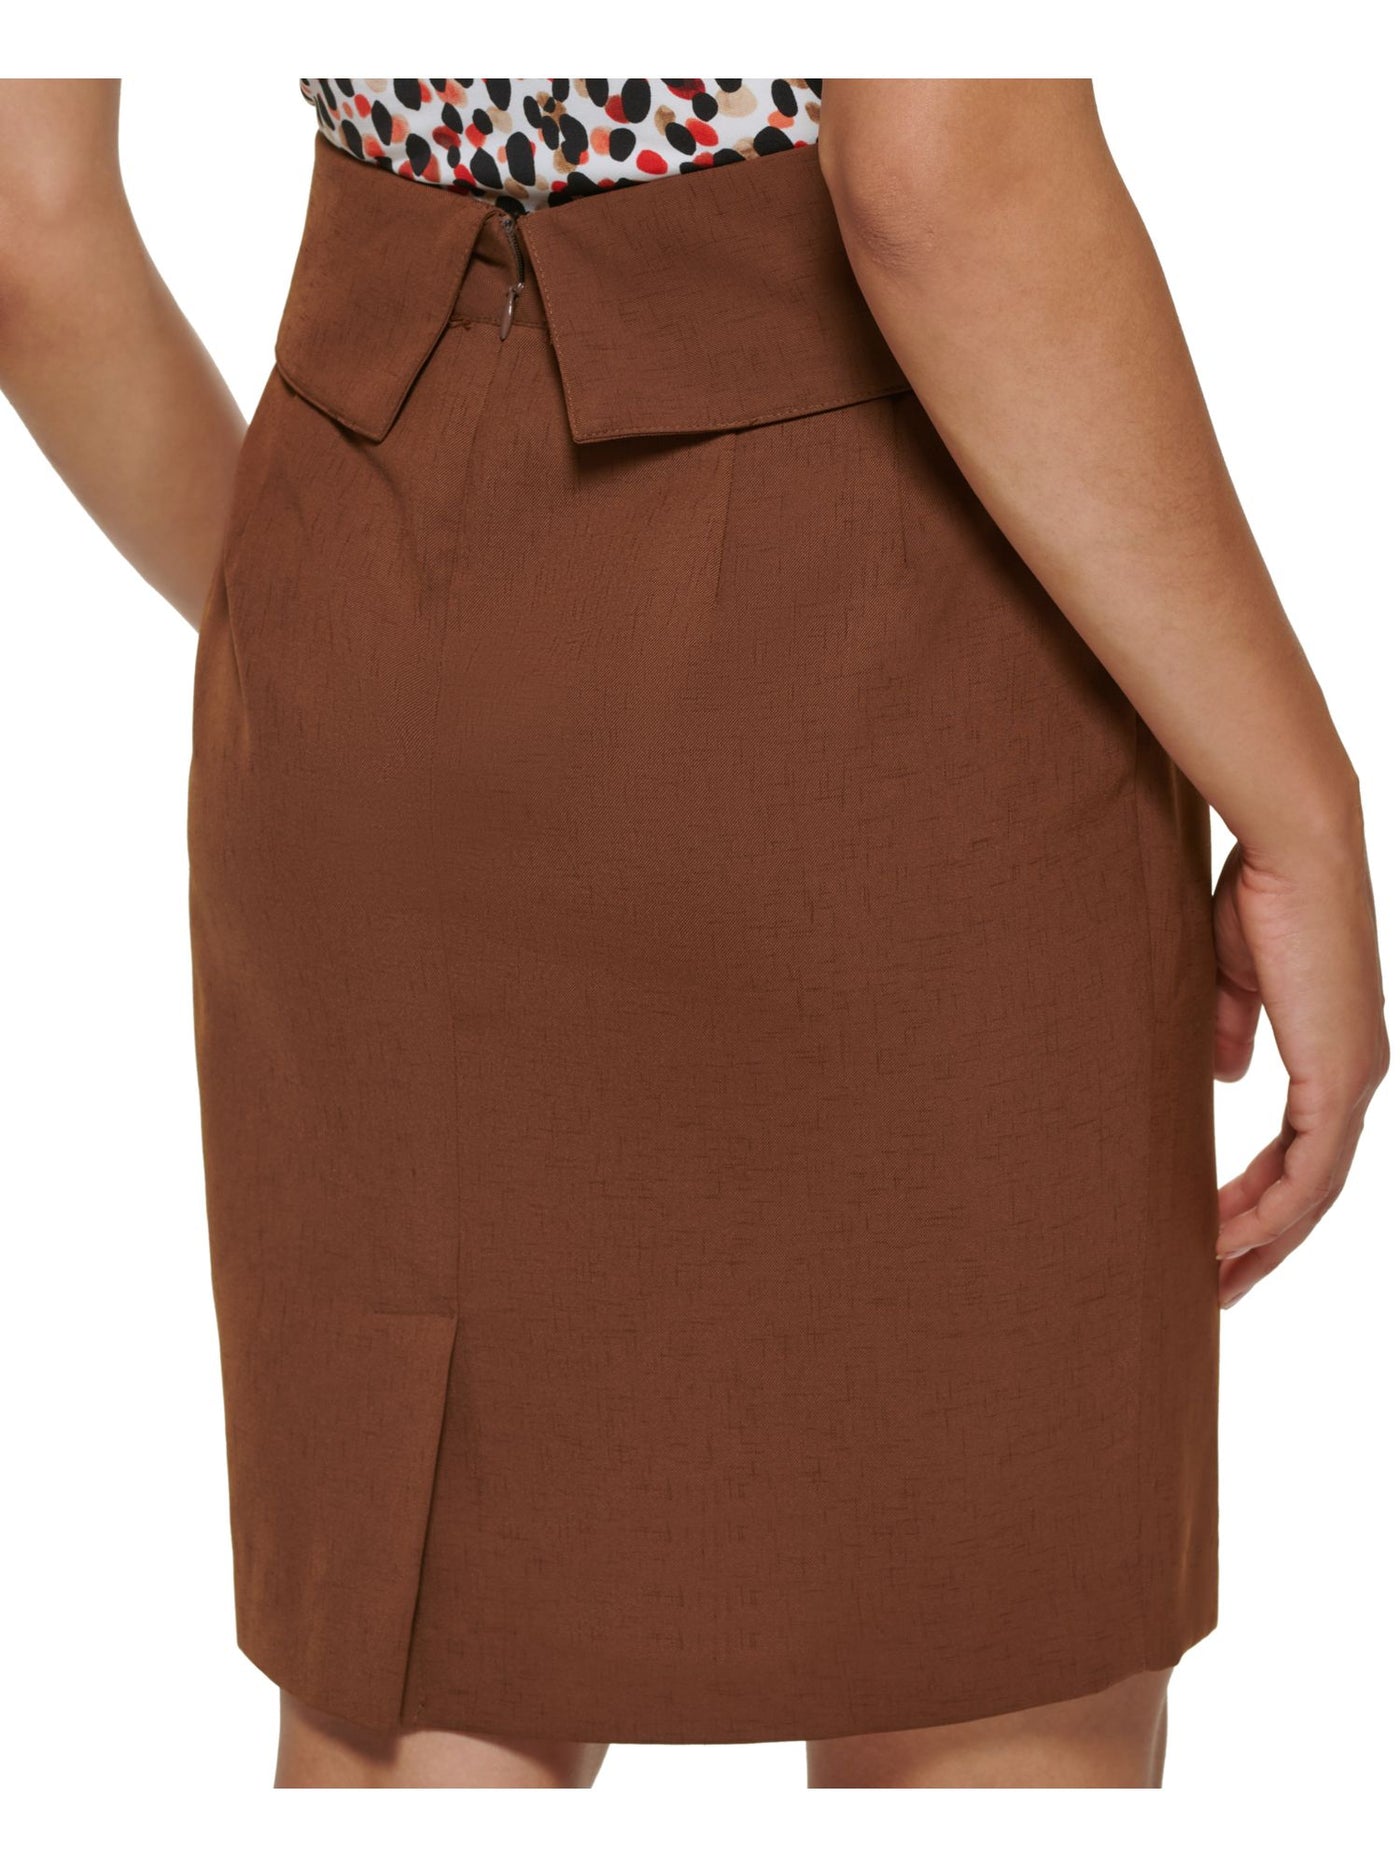 DKNY Womens Brown Zippered Pocketed Tie Front Vented Back Above The Knee Wear To Work Pencil Skirt Petites 2P